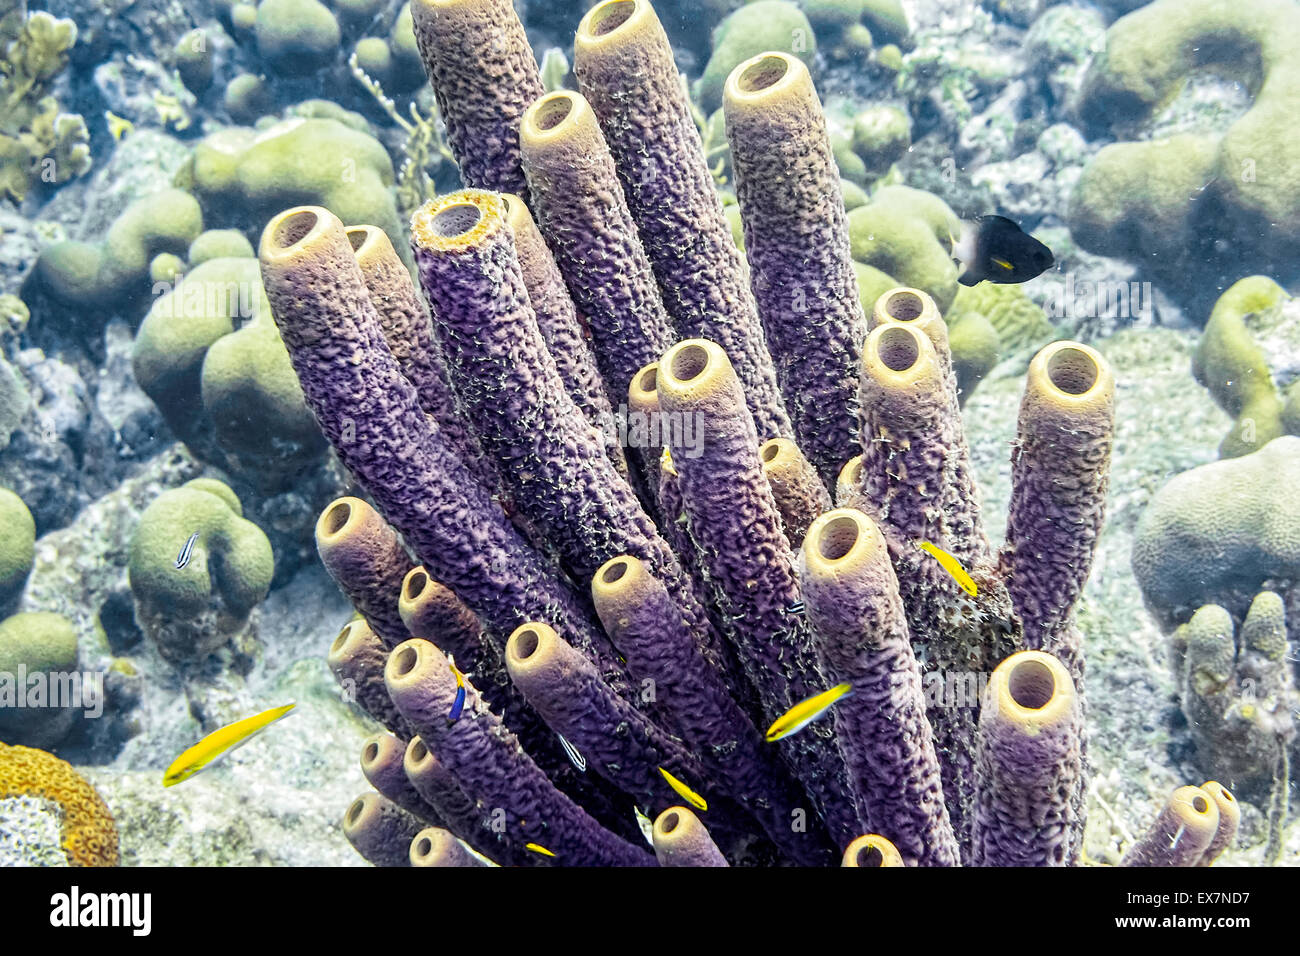 Stovepipe Sponge surrounded by corals and juveniles bluehead wrasses at the Sharon's Serenity site in Klein Bonaire, Bonaire Stock Photo